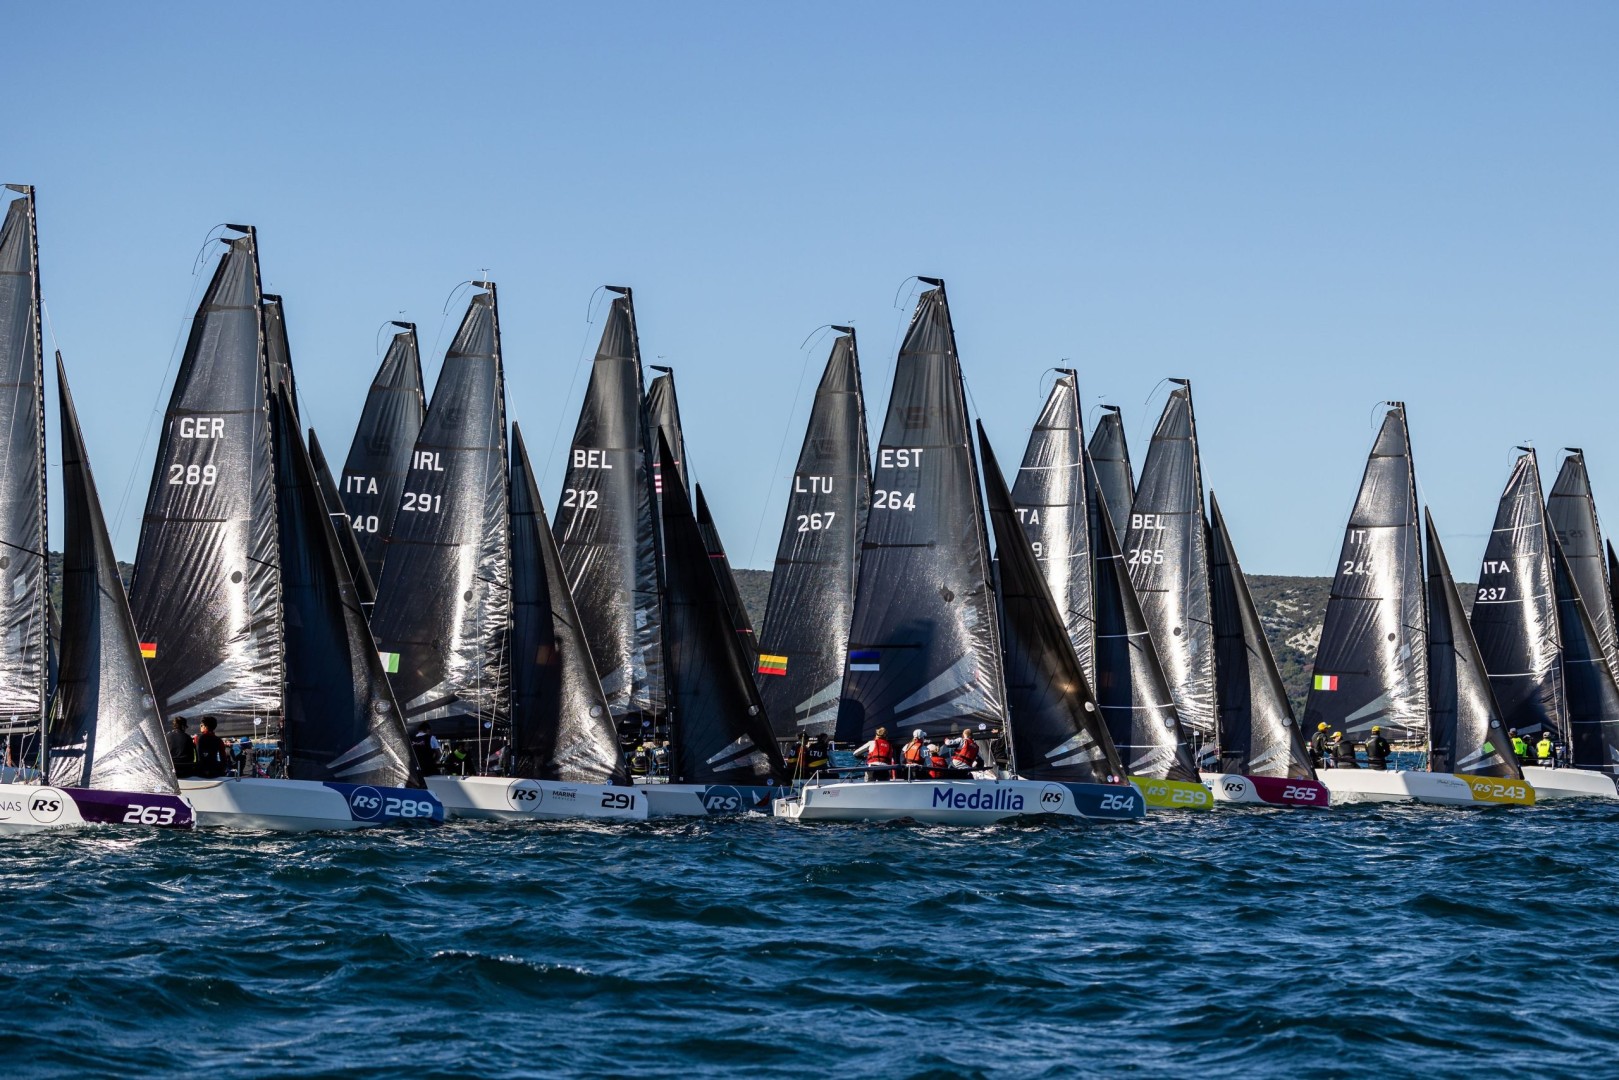 That’s a wrap for the first-ever RS21 World Championship